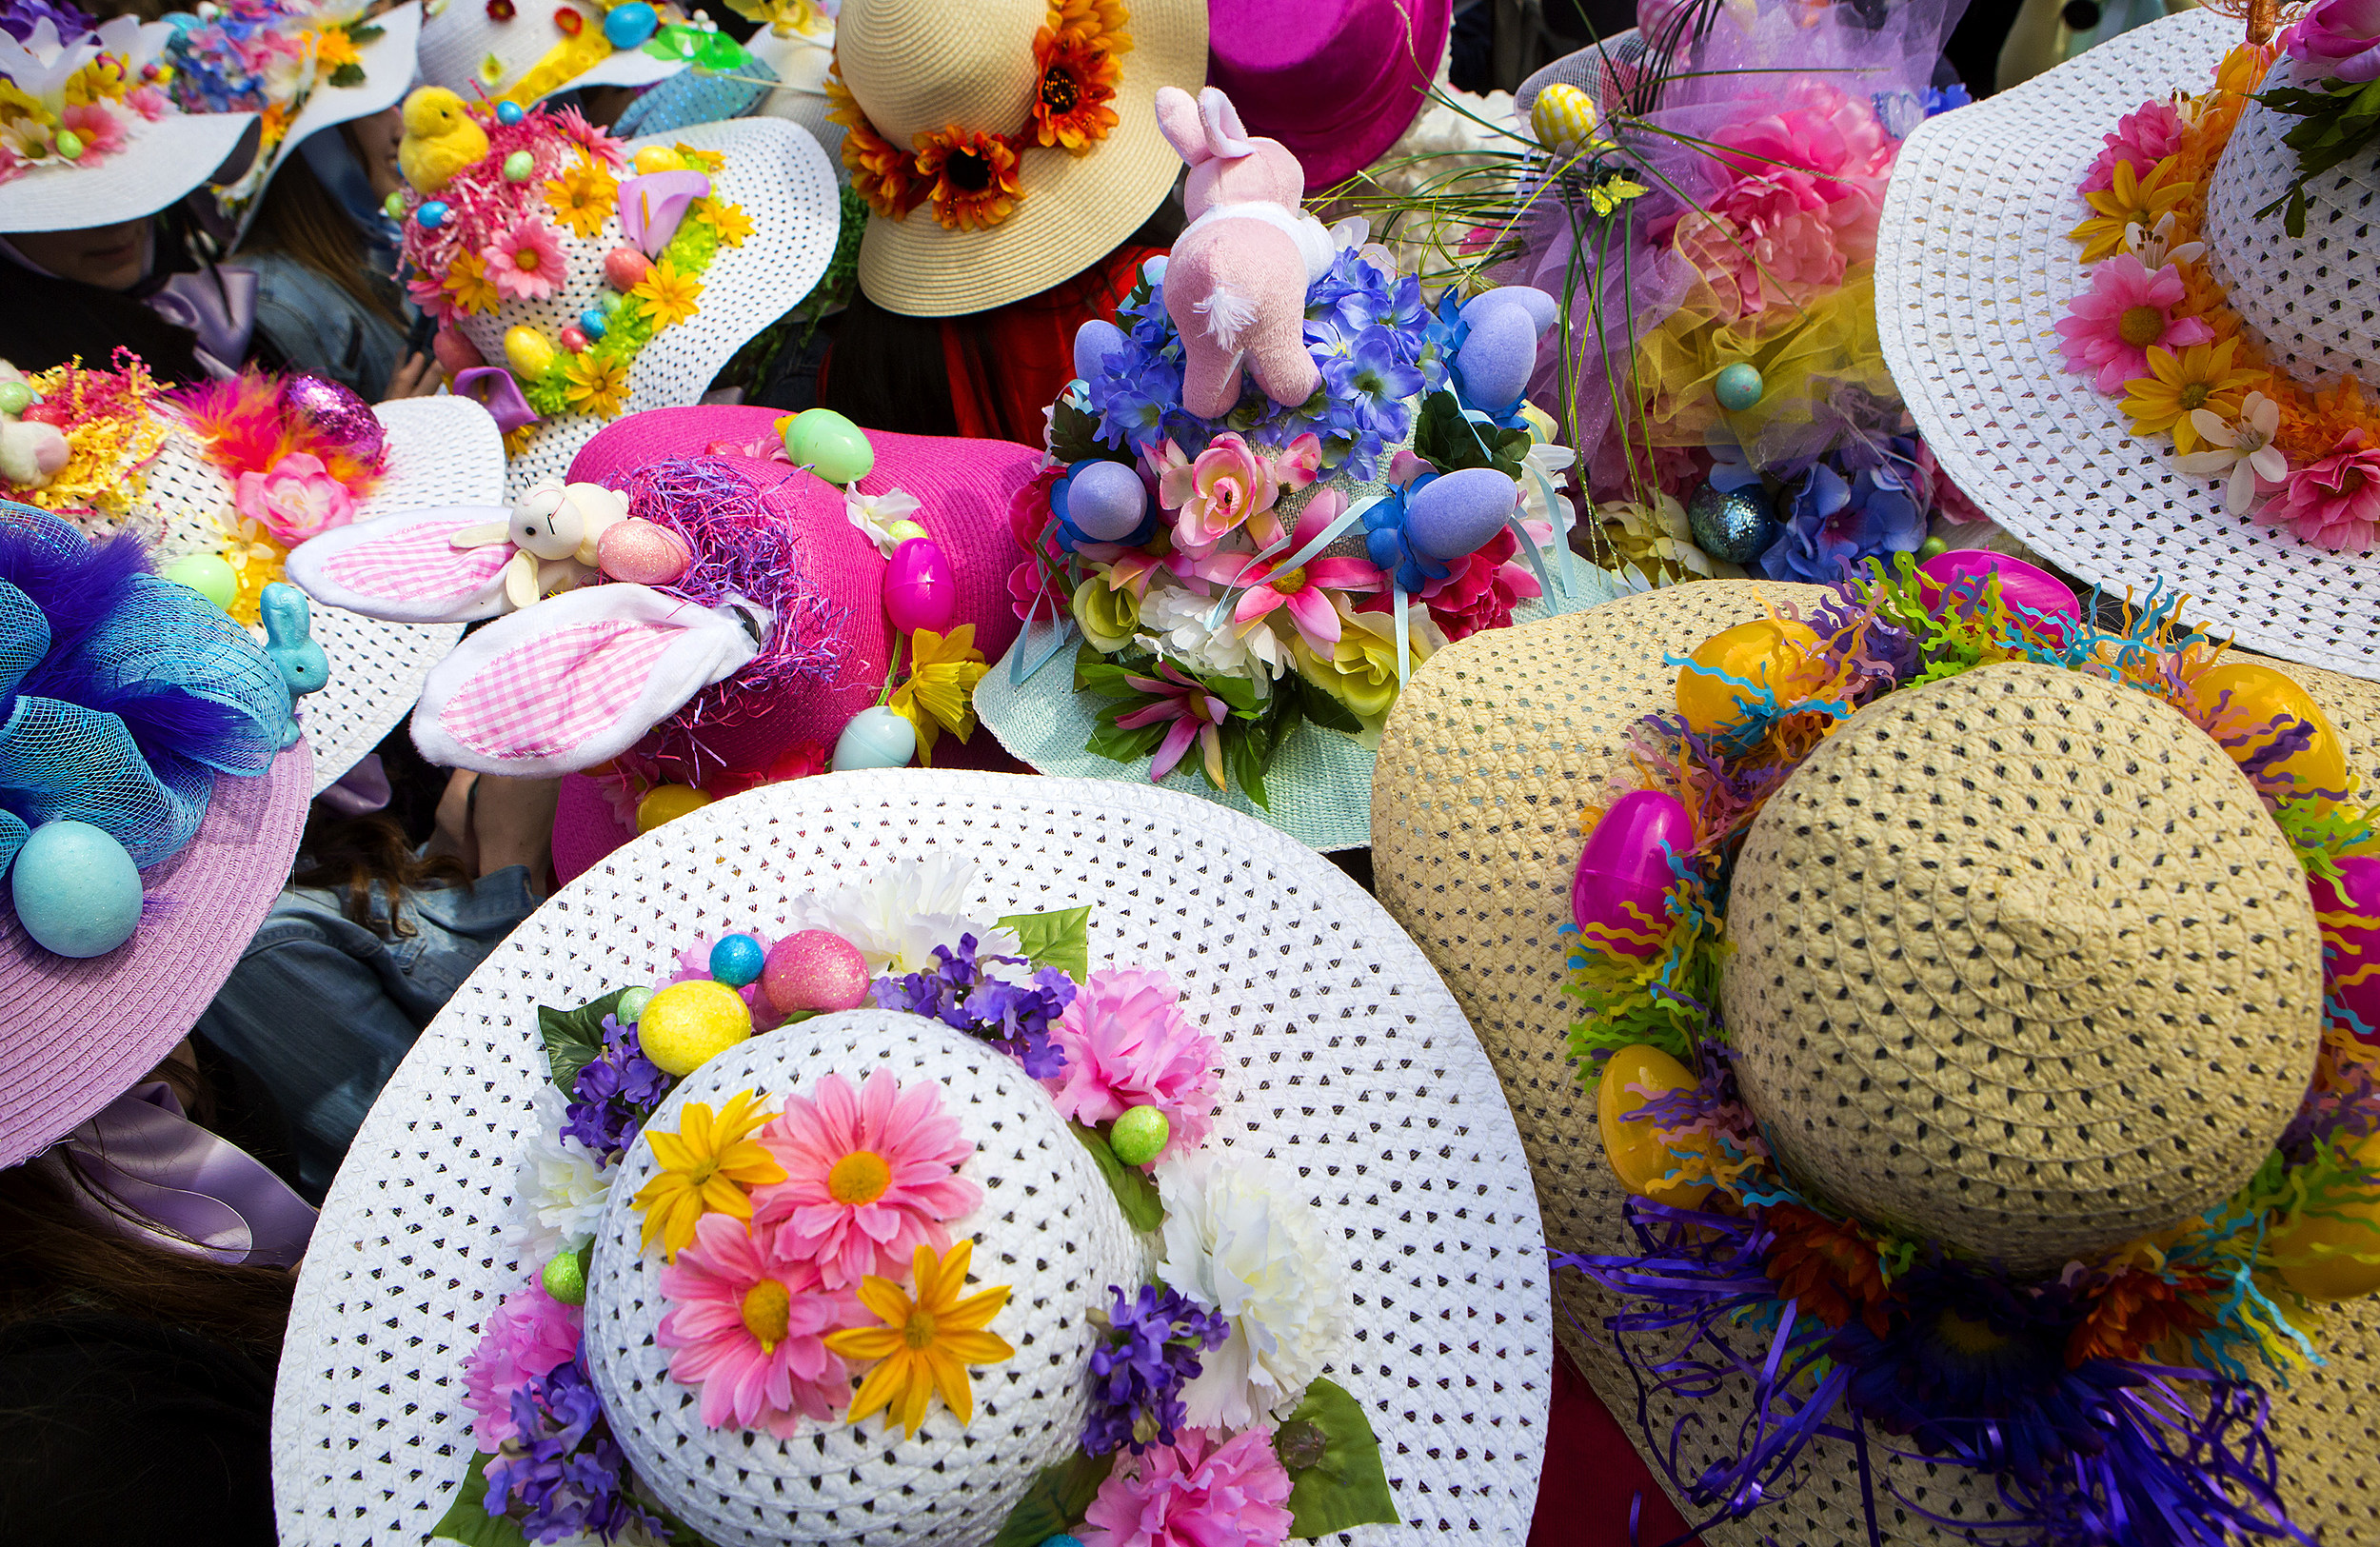 The Easter Bonnet Parade in Washingtonville